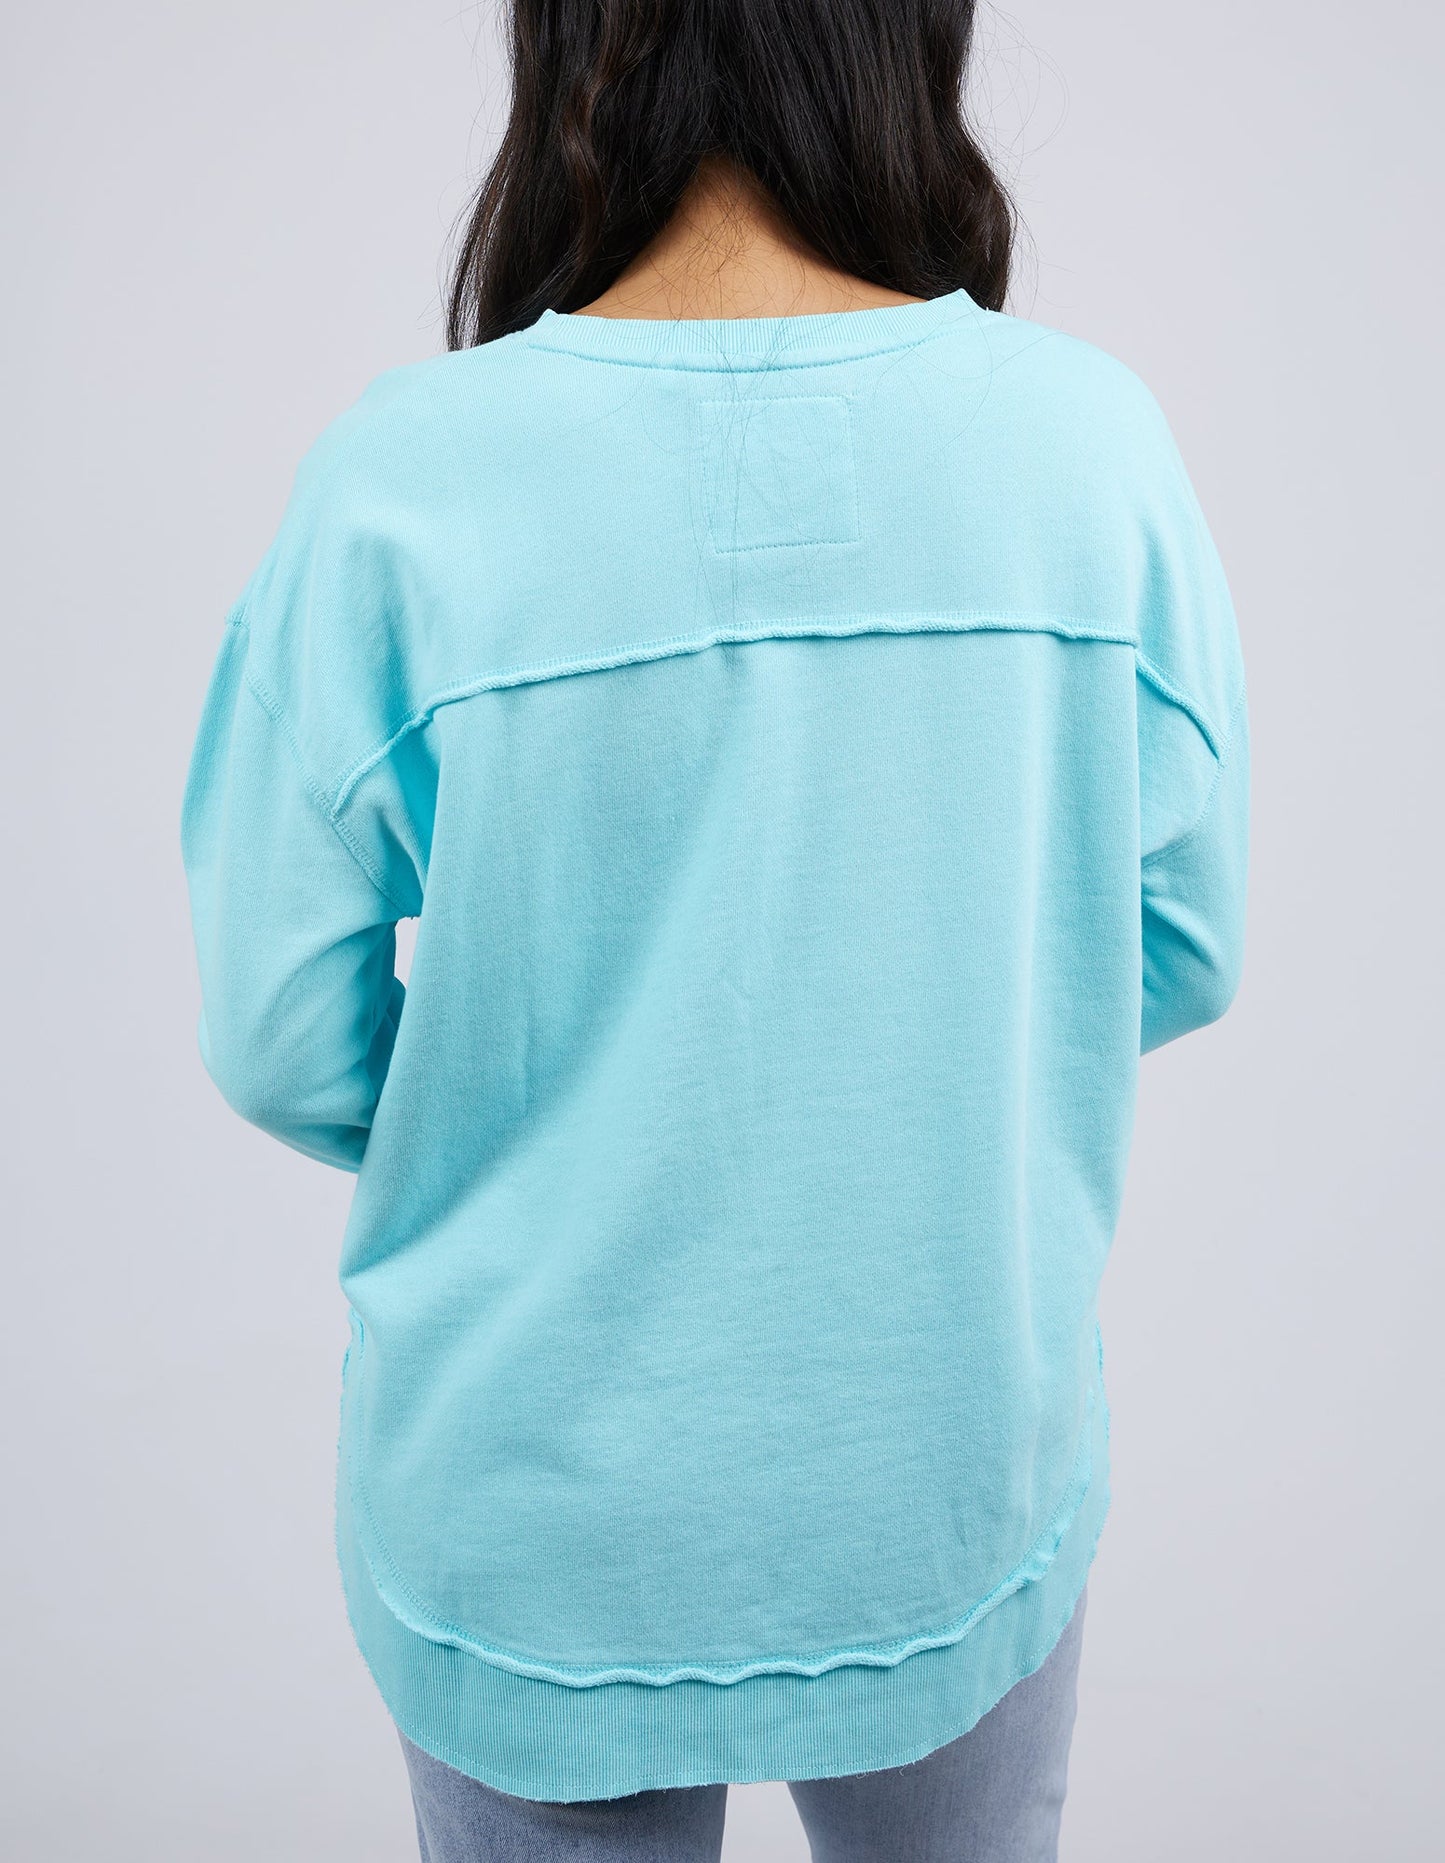 FOXWOOD SIMPLIFIED CREW - LIGHT BLUE - THE VOGUE STORE